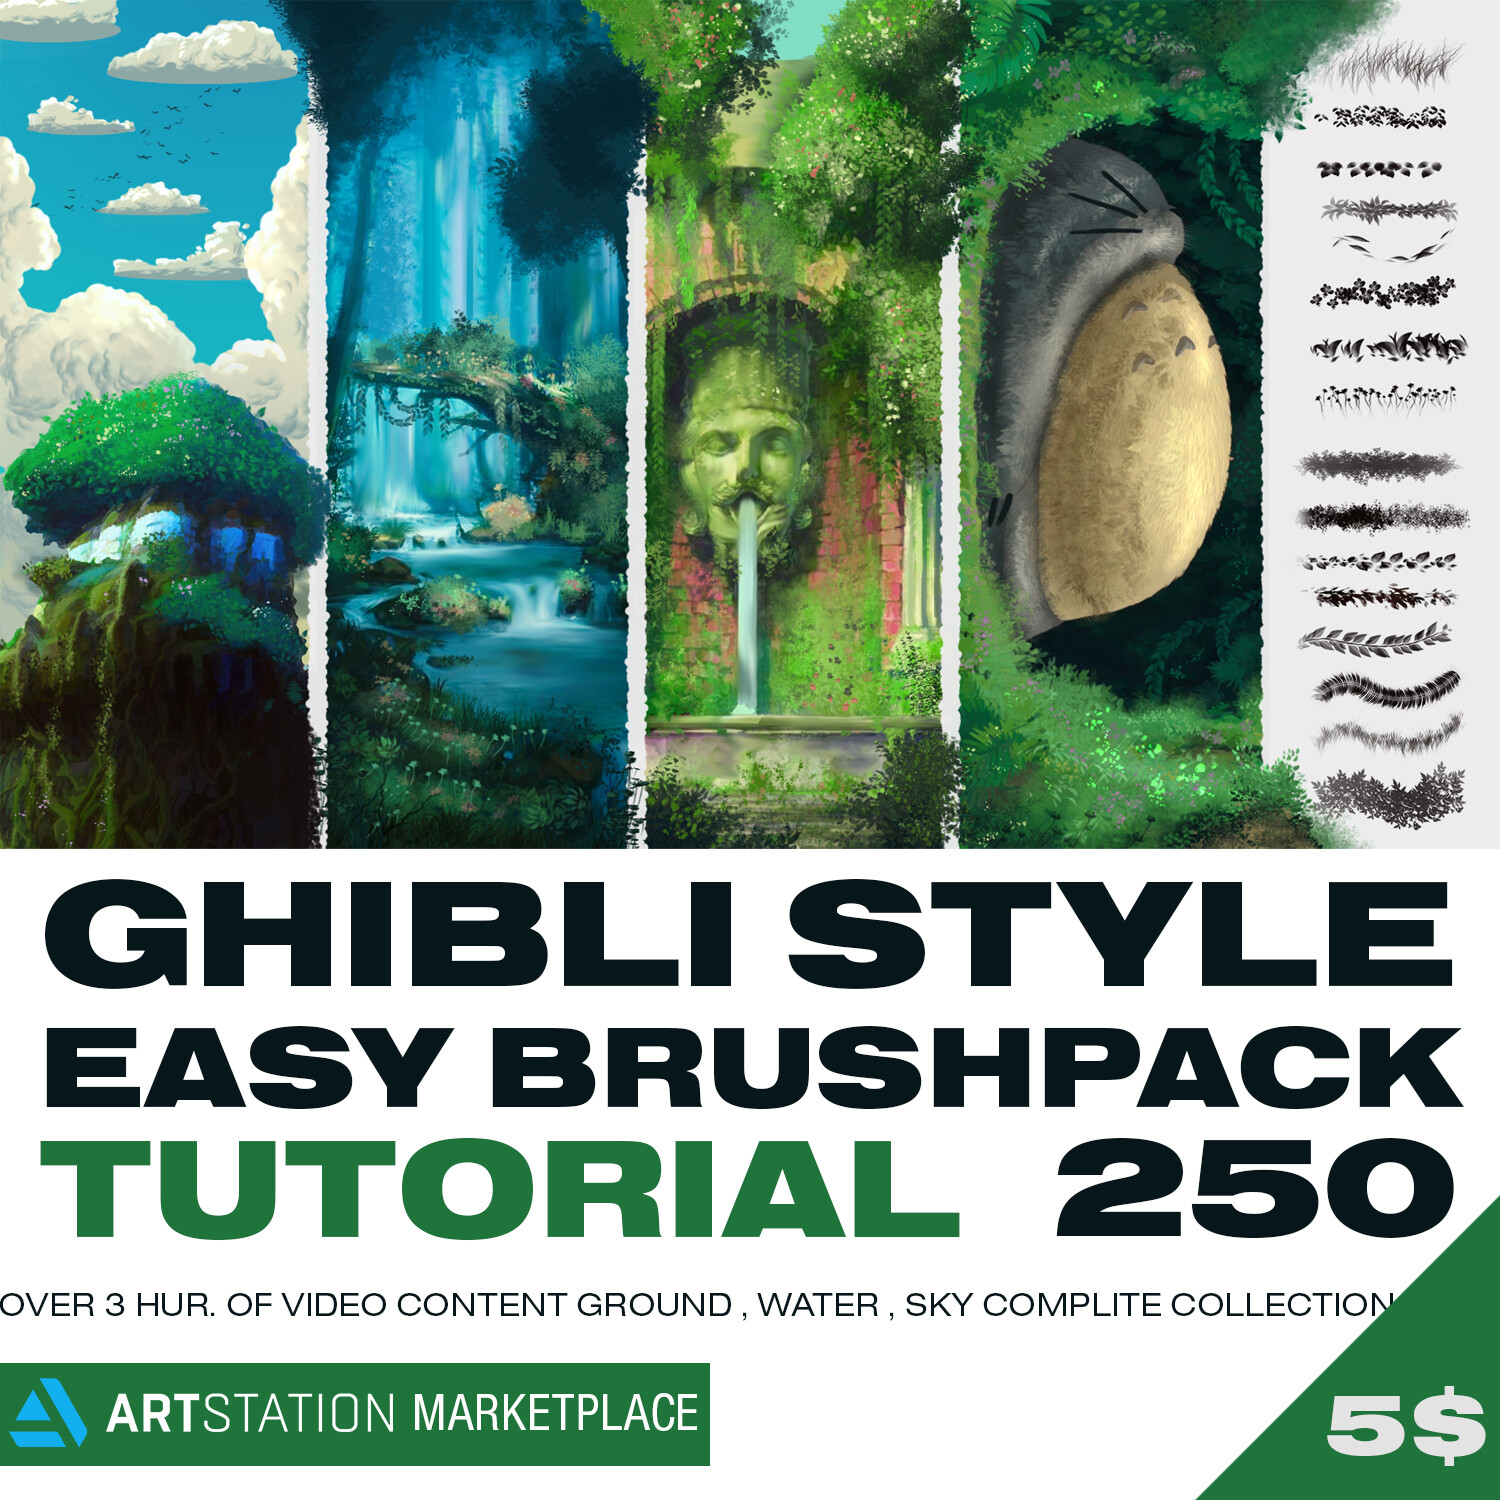 250 -GHIBLI STYLE EASY BRUSH-PACK and how to use it (TUTORIAL) [GROUND, WATER , SKY] -BUNDLE-